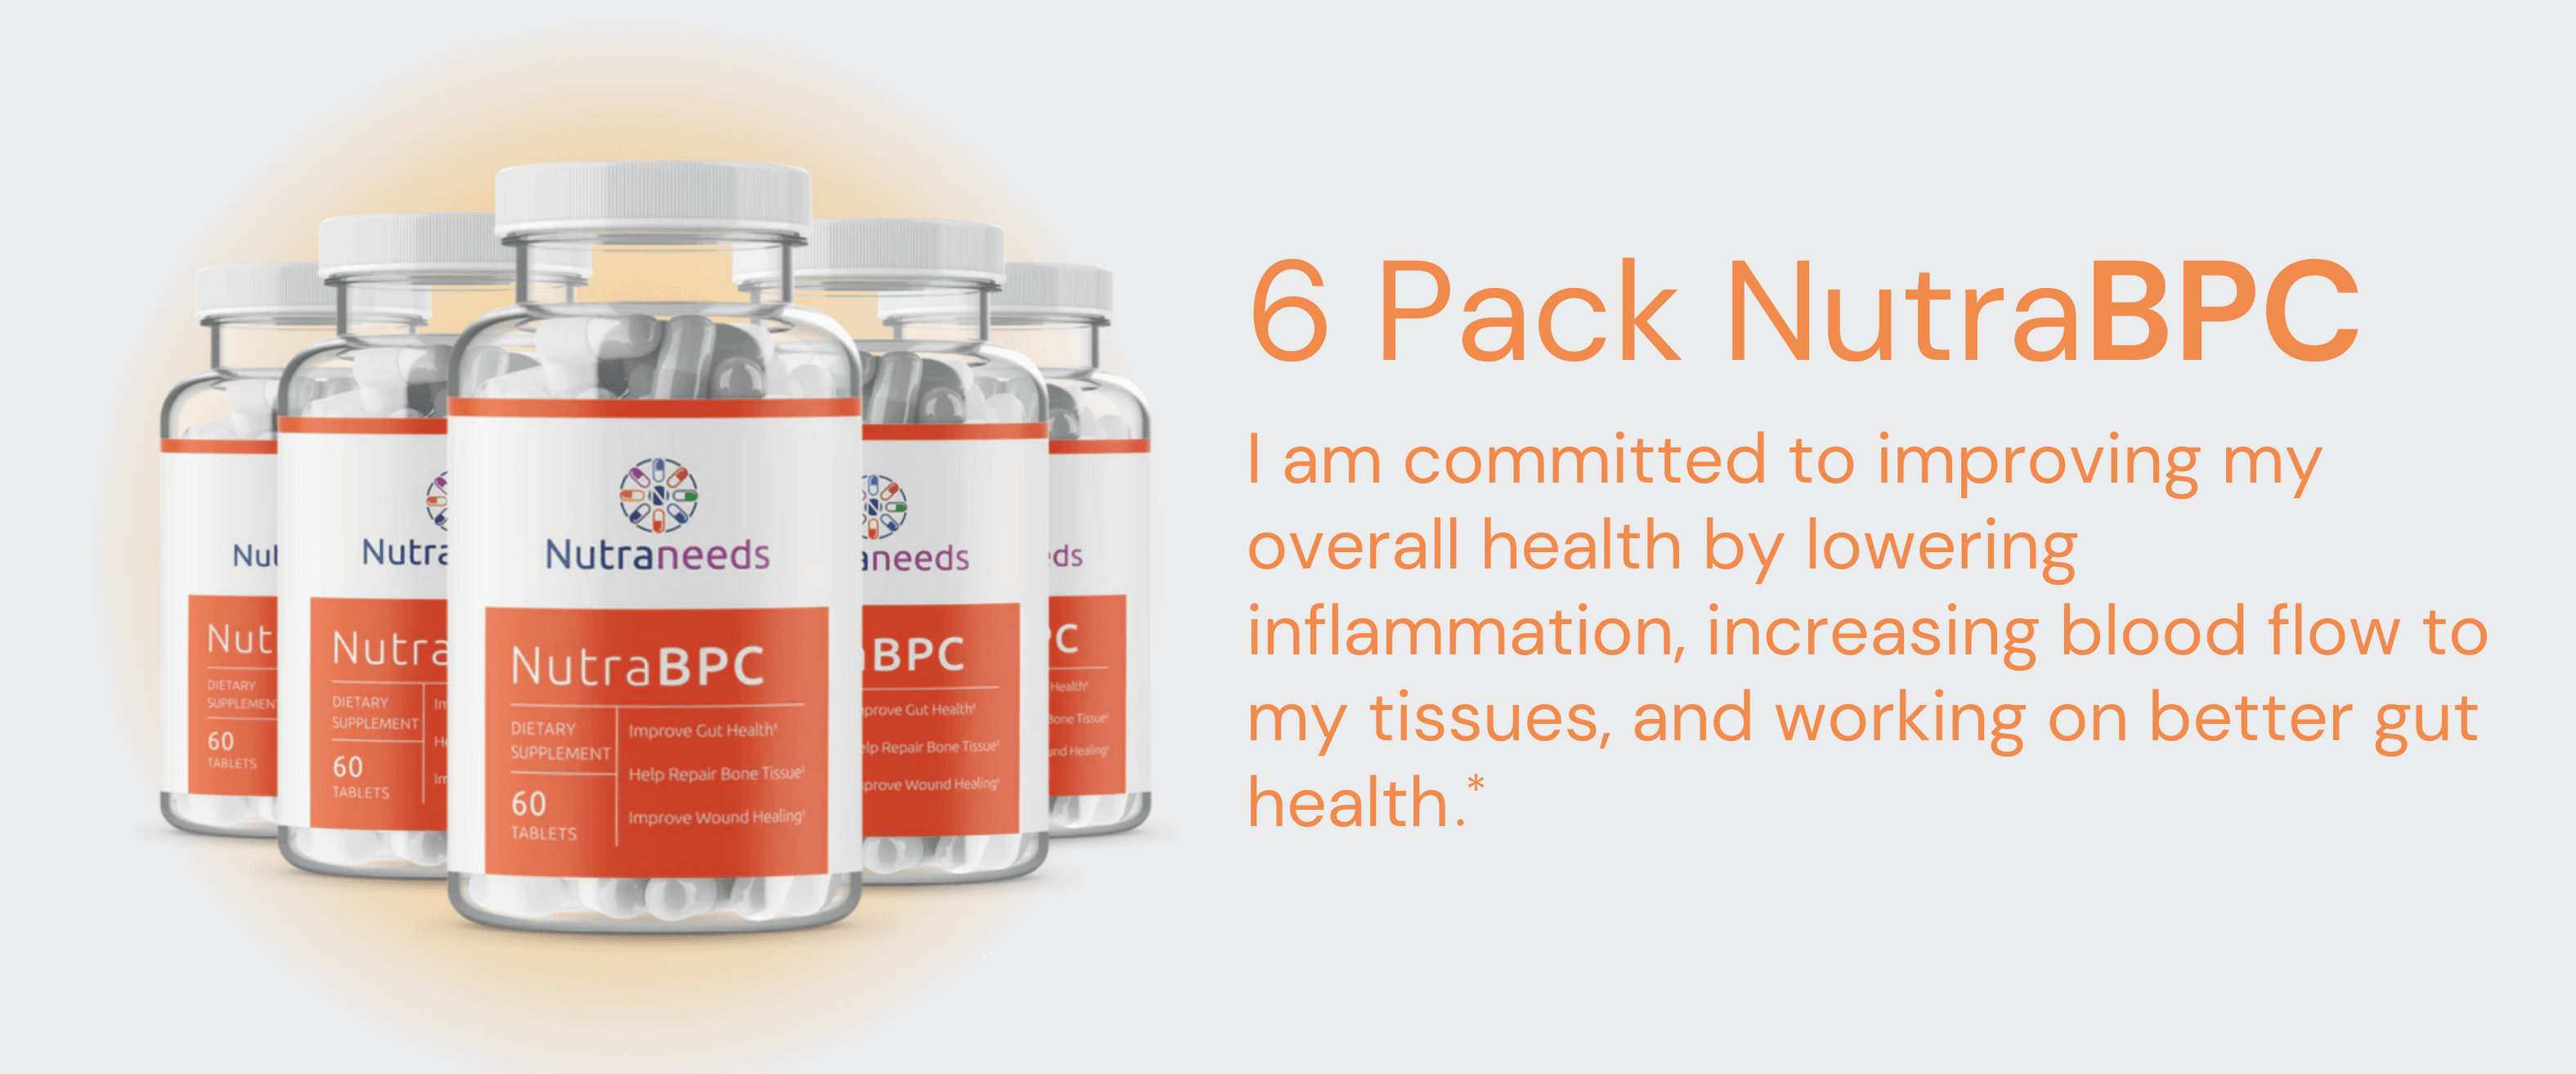 6 Pack of NutraBPC to improve overall health and gut health